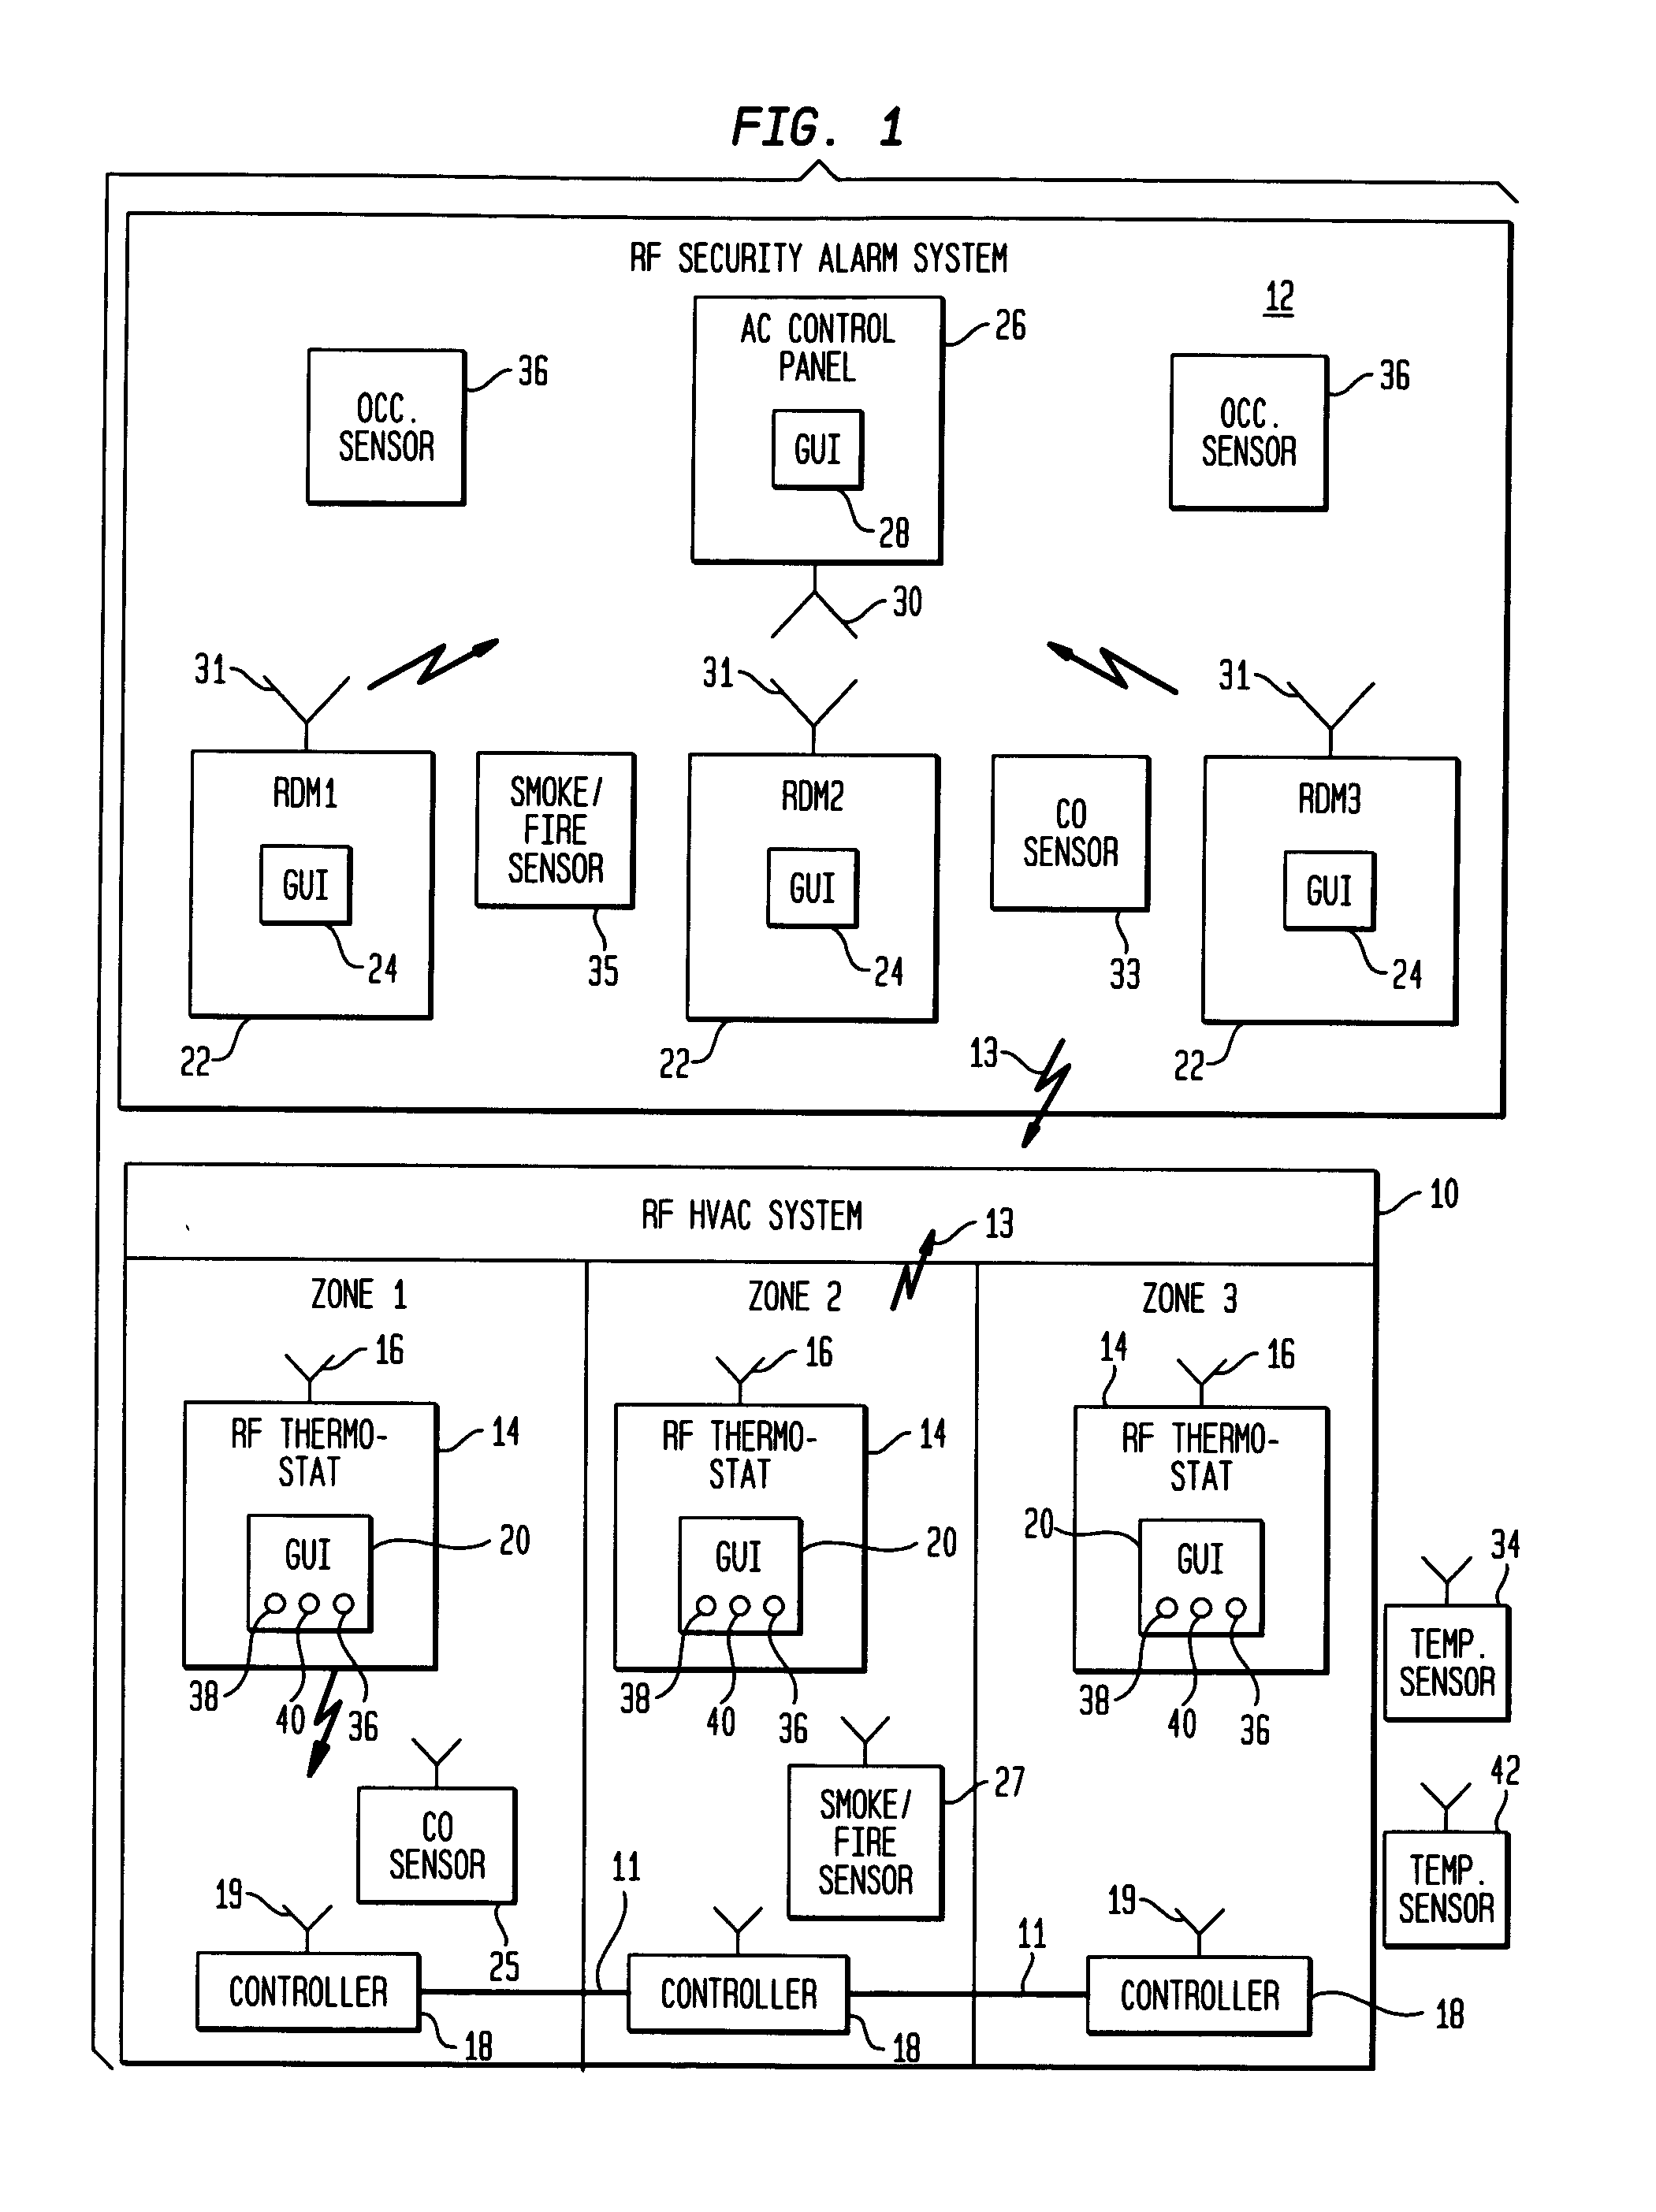 RF interconnected HVAC system and security system